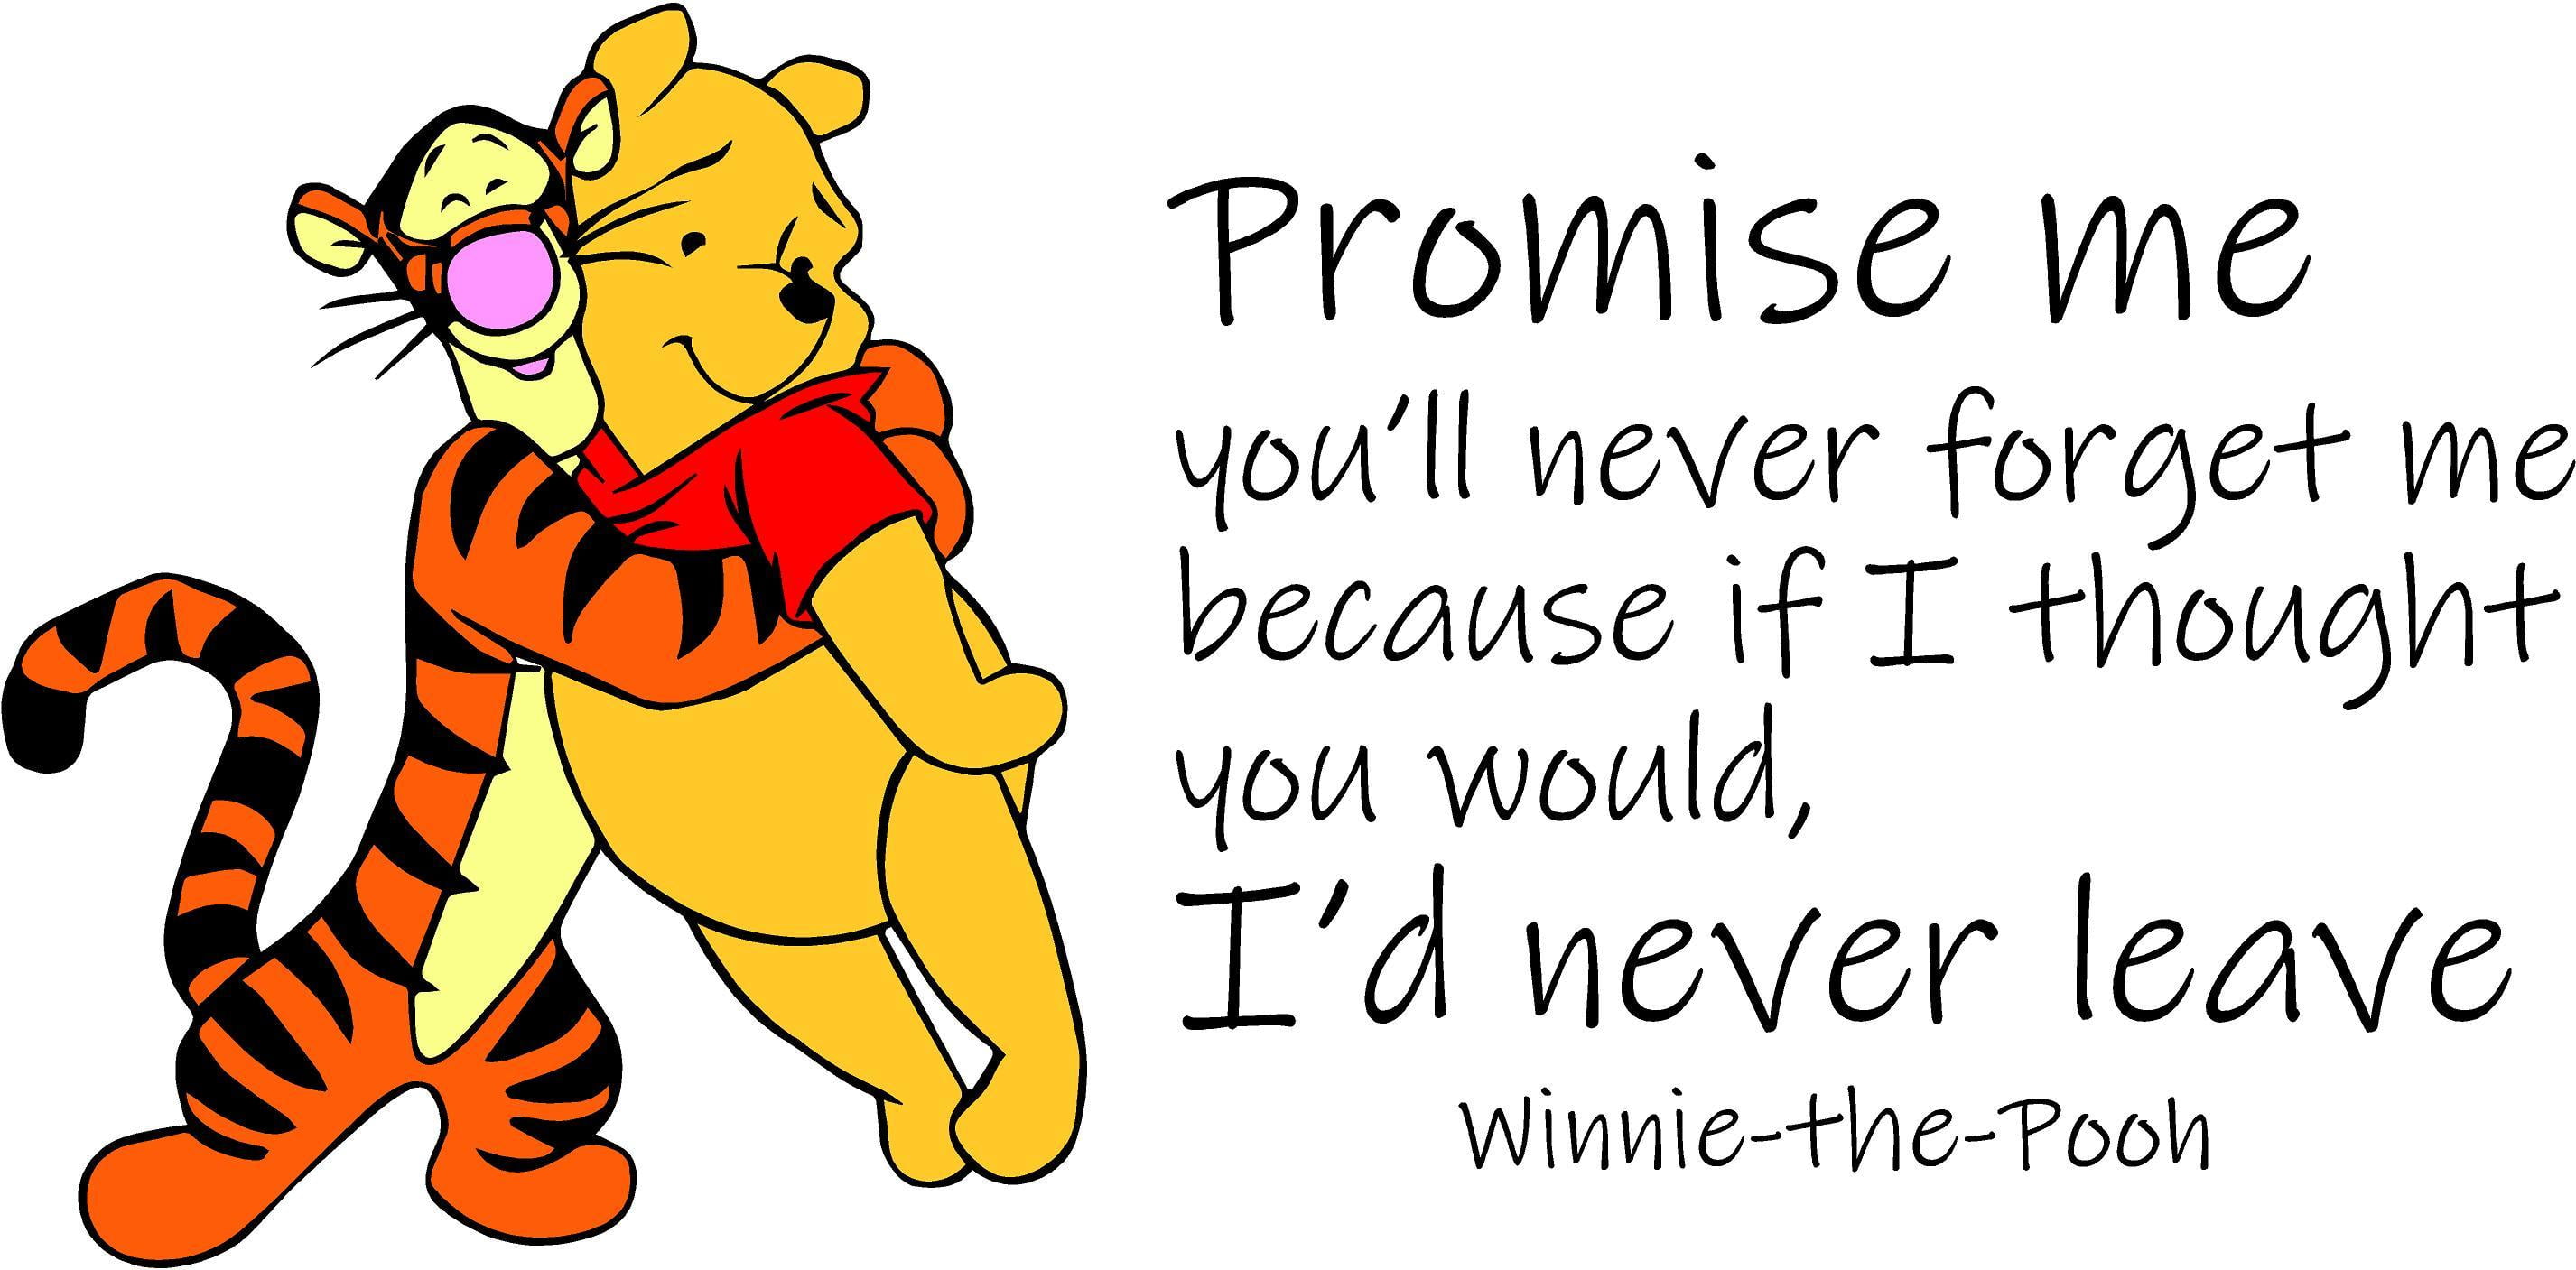 Tigger Quote 16 Tigger Quotes About Friendship Friendship Winnie The Pooh Quotes Pooh